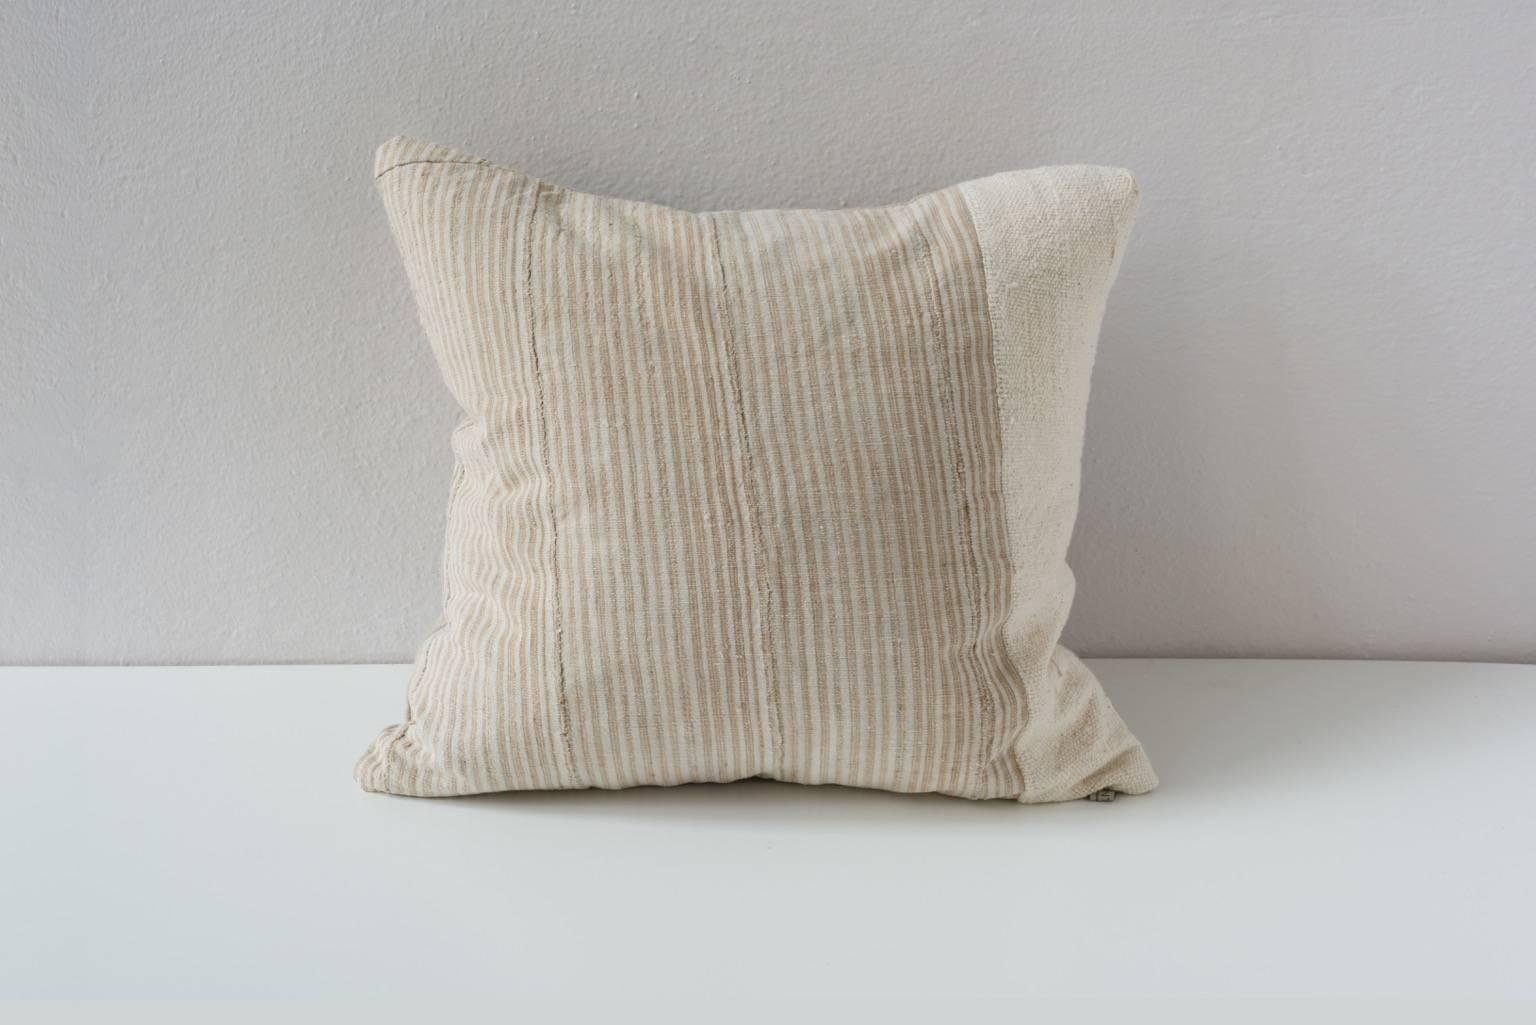 A mirrored set of piecework Hausa Yoruba handwoven striped fabric with a cream colored Mali stripe. 

- Linen on reverse, see image
- 75/25 goose feather and down inserts.
- Concealed zippers.
- Check our 1stdibs storefront for pillows in